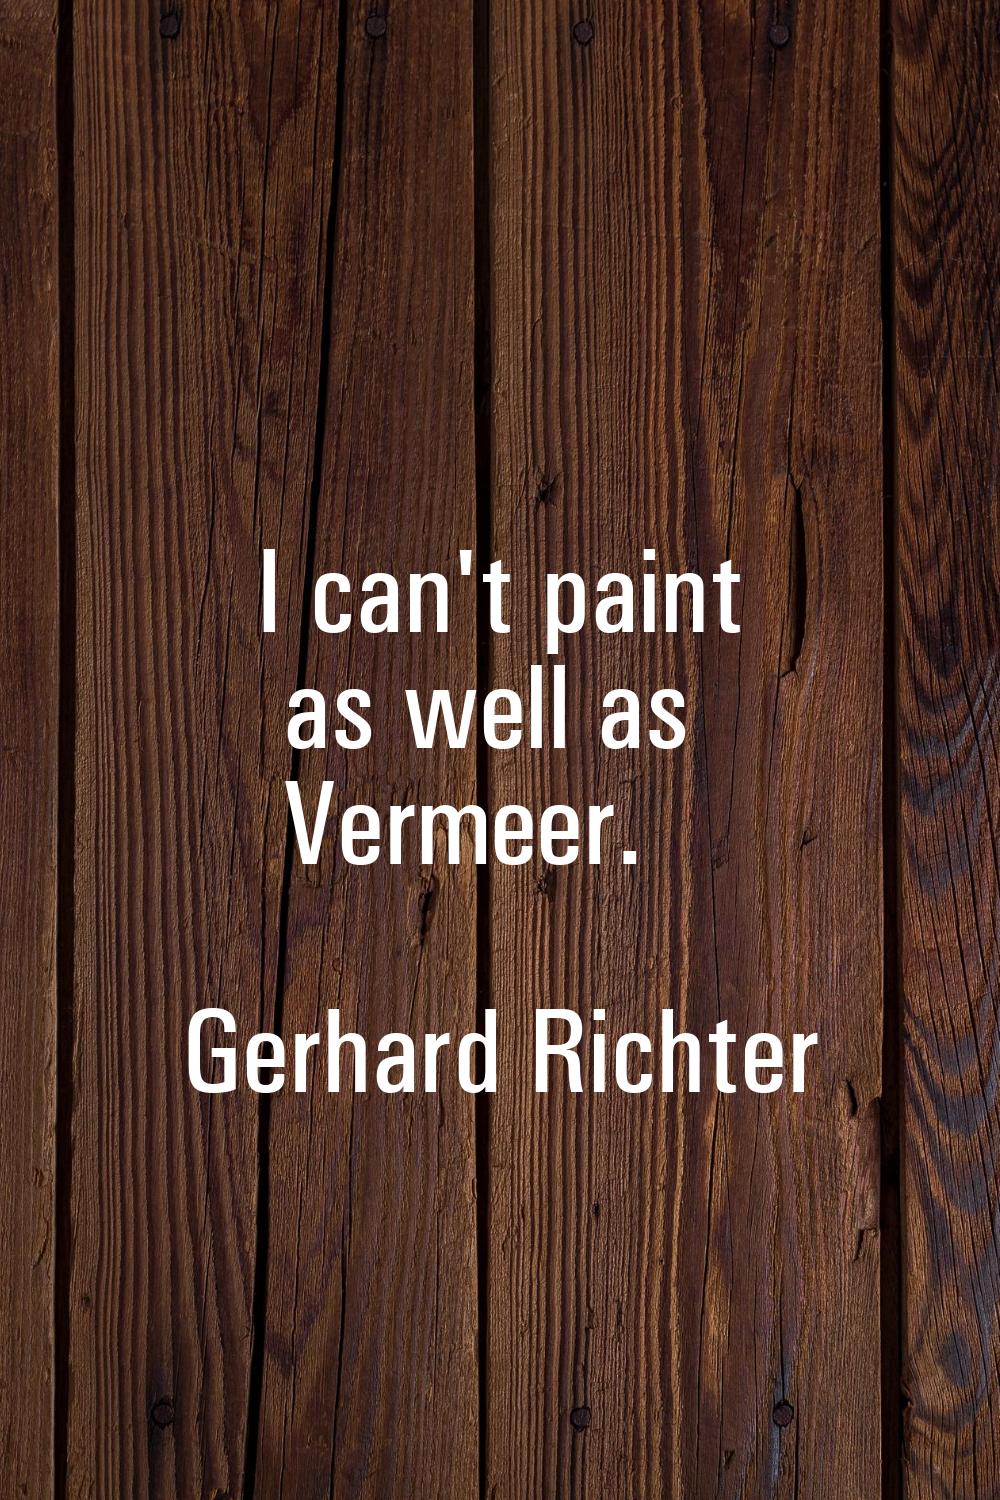 I can't paint as well as Vermeer.